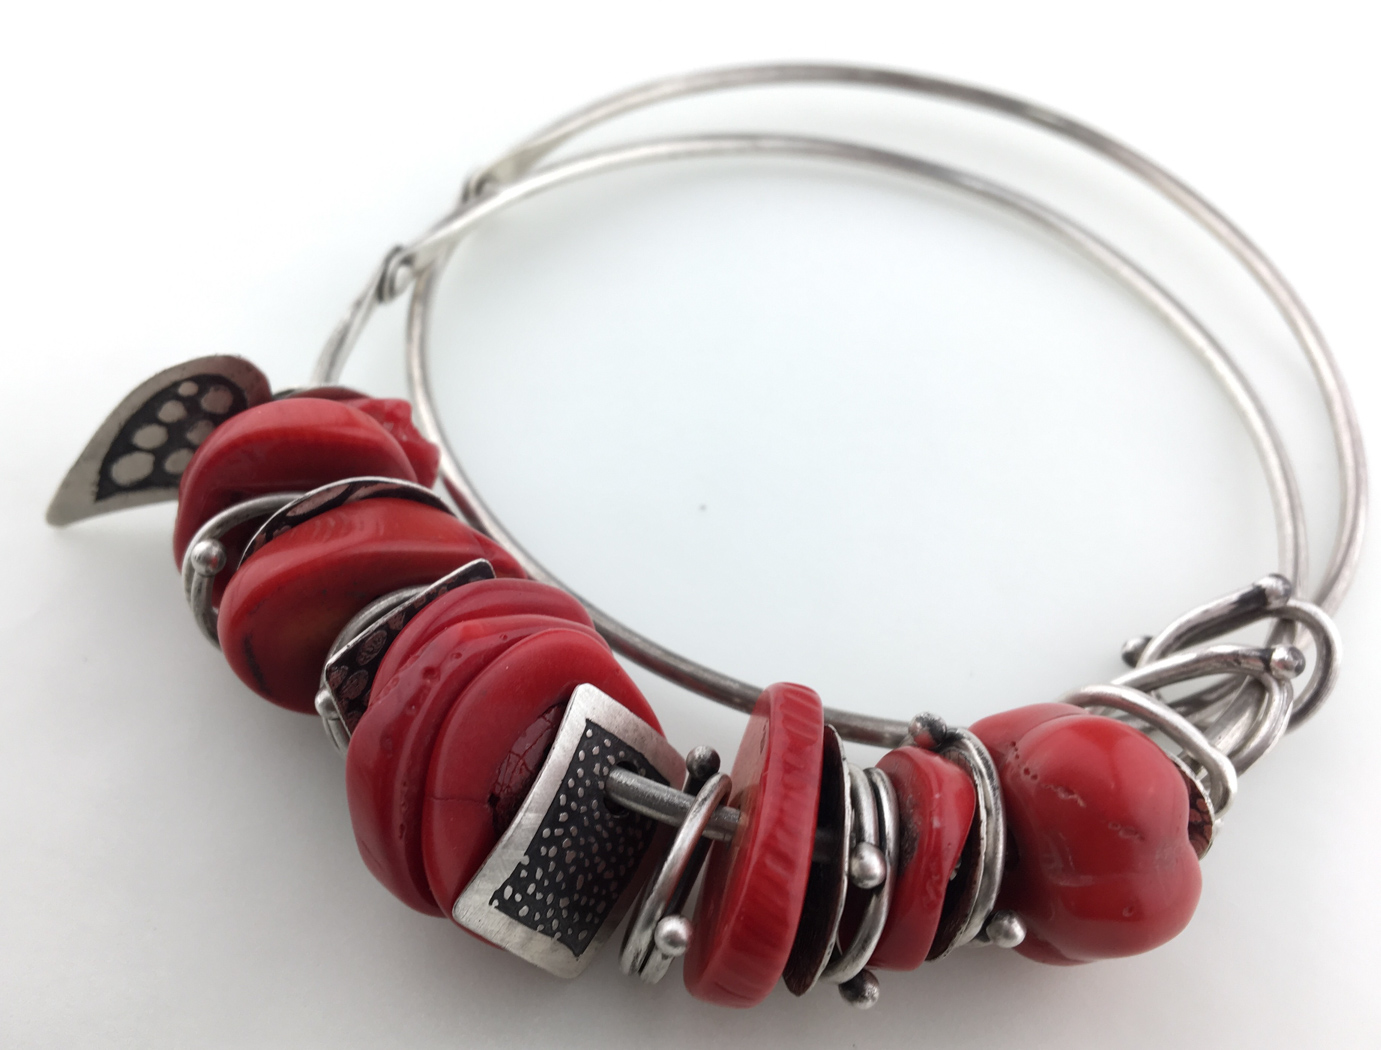 Closeup of a metal bracelet with red stones on it